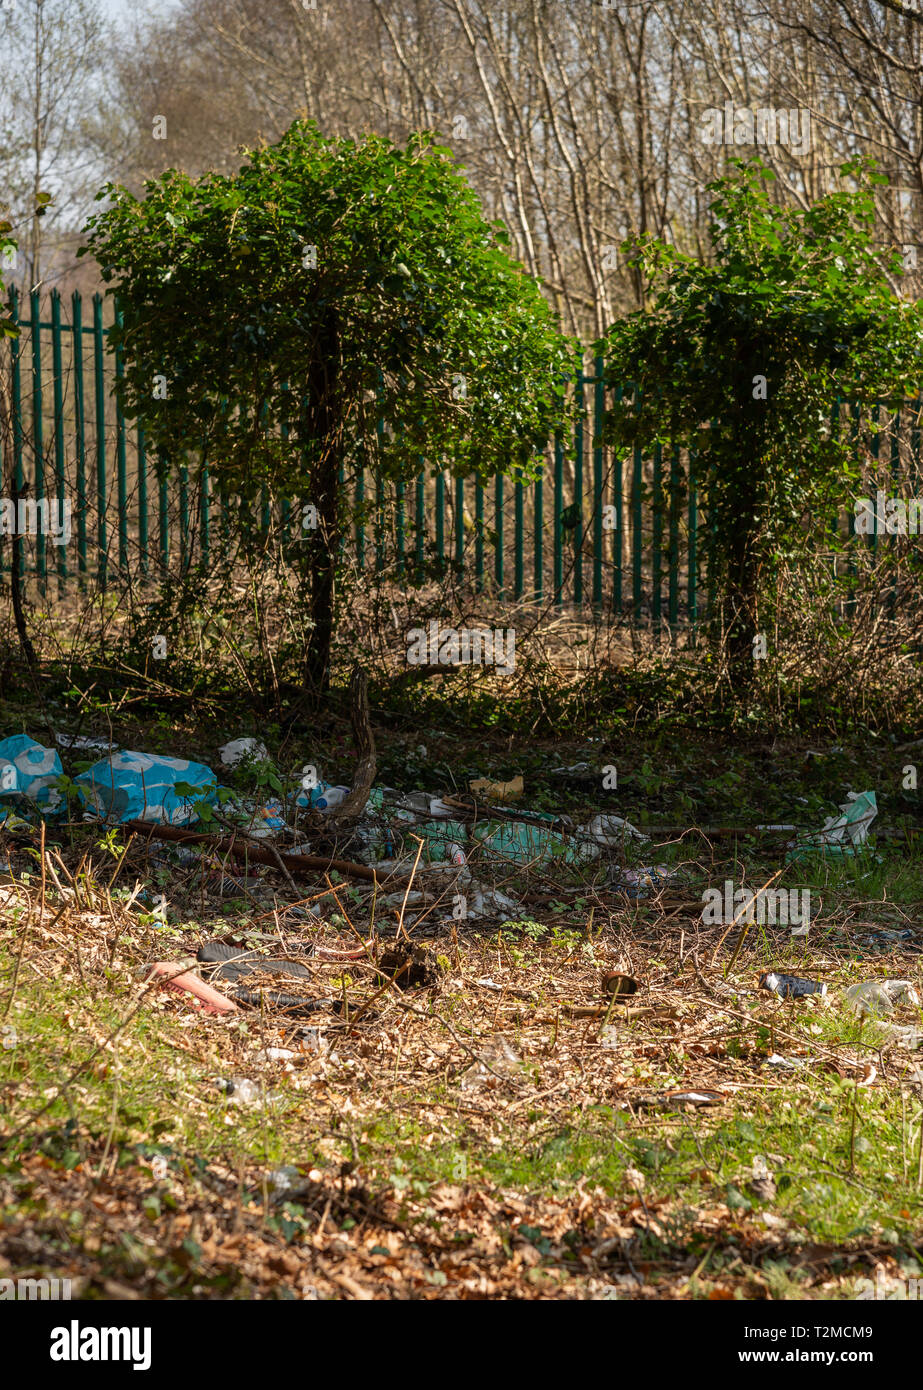 Plastic polution in the forest / Litter missing from the forests in UK Stock Photo